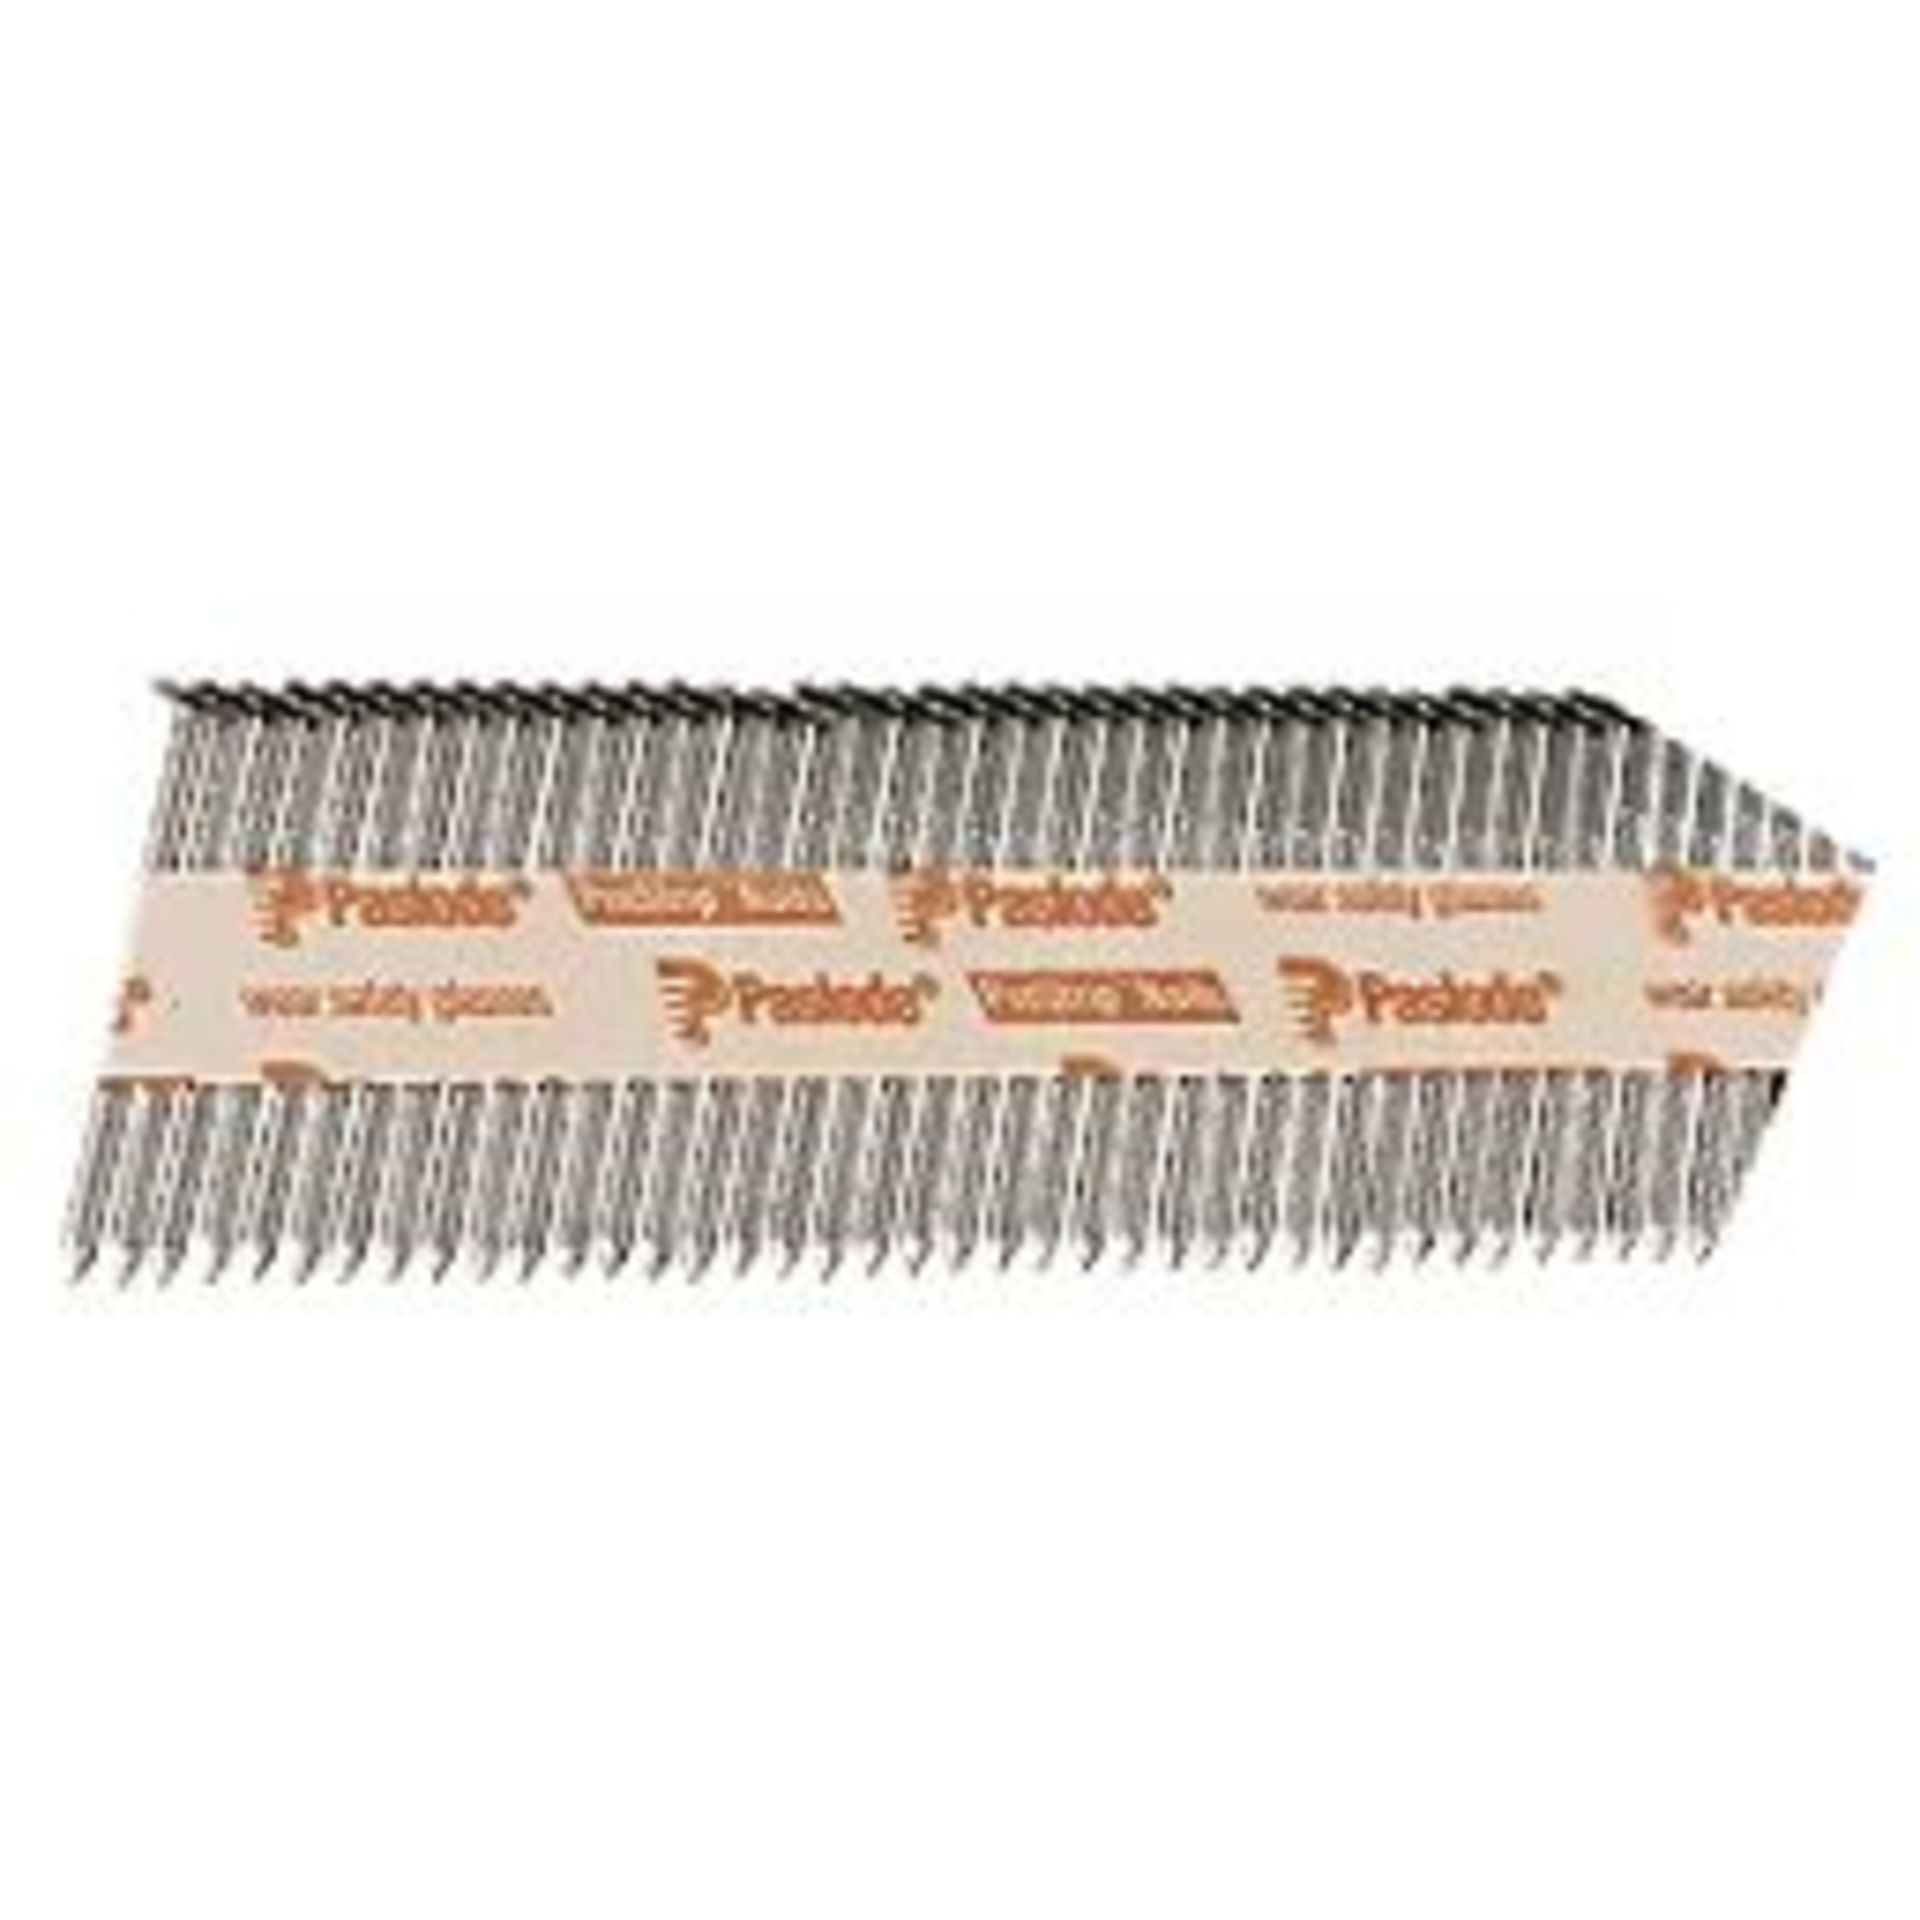 2 x PASLODE GALVANISED-PLUS IM350 COLLATED NAILS 2.8MM X 51MM 1100 PACK. - ER46. RRP £55.99 each.